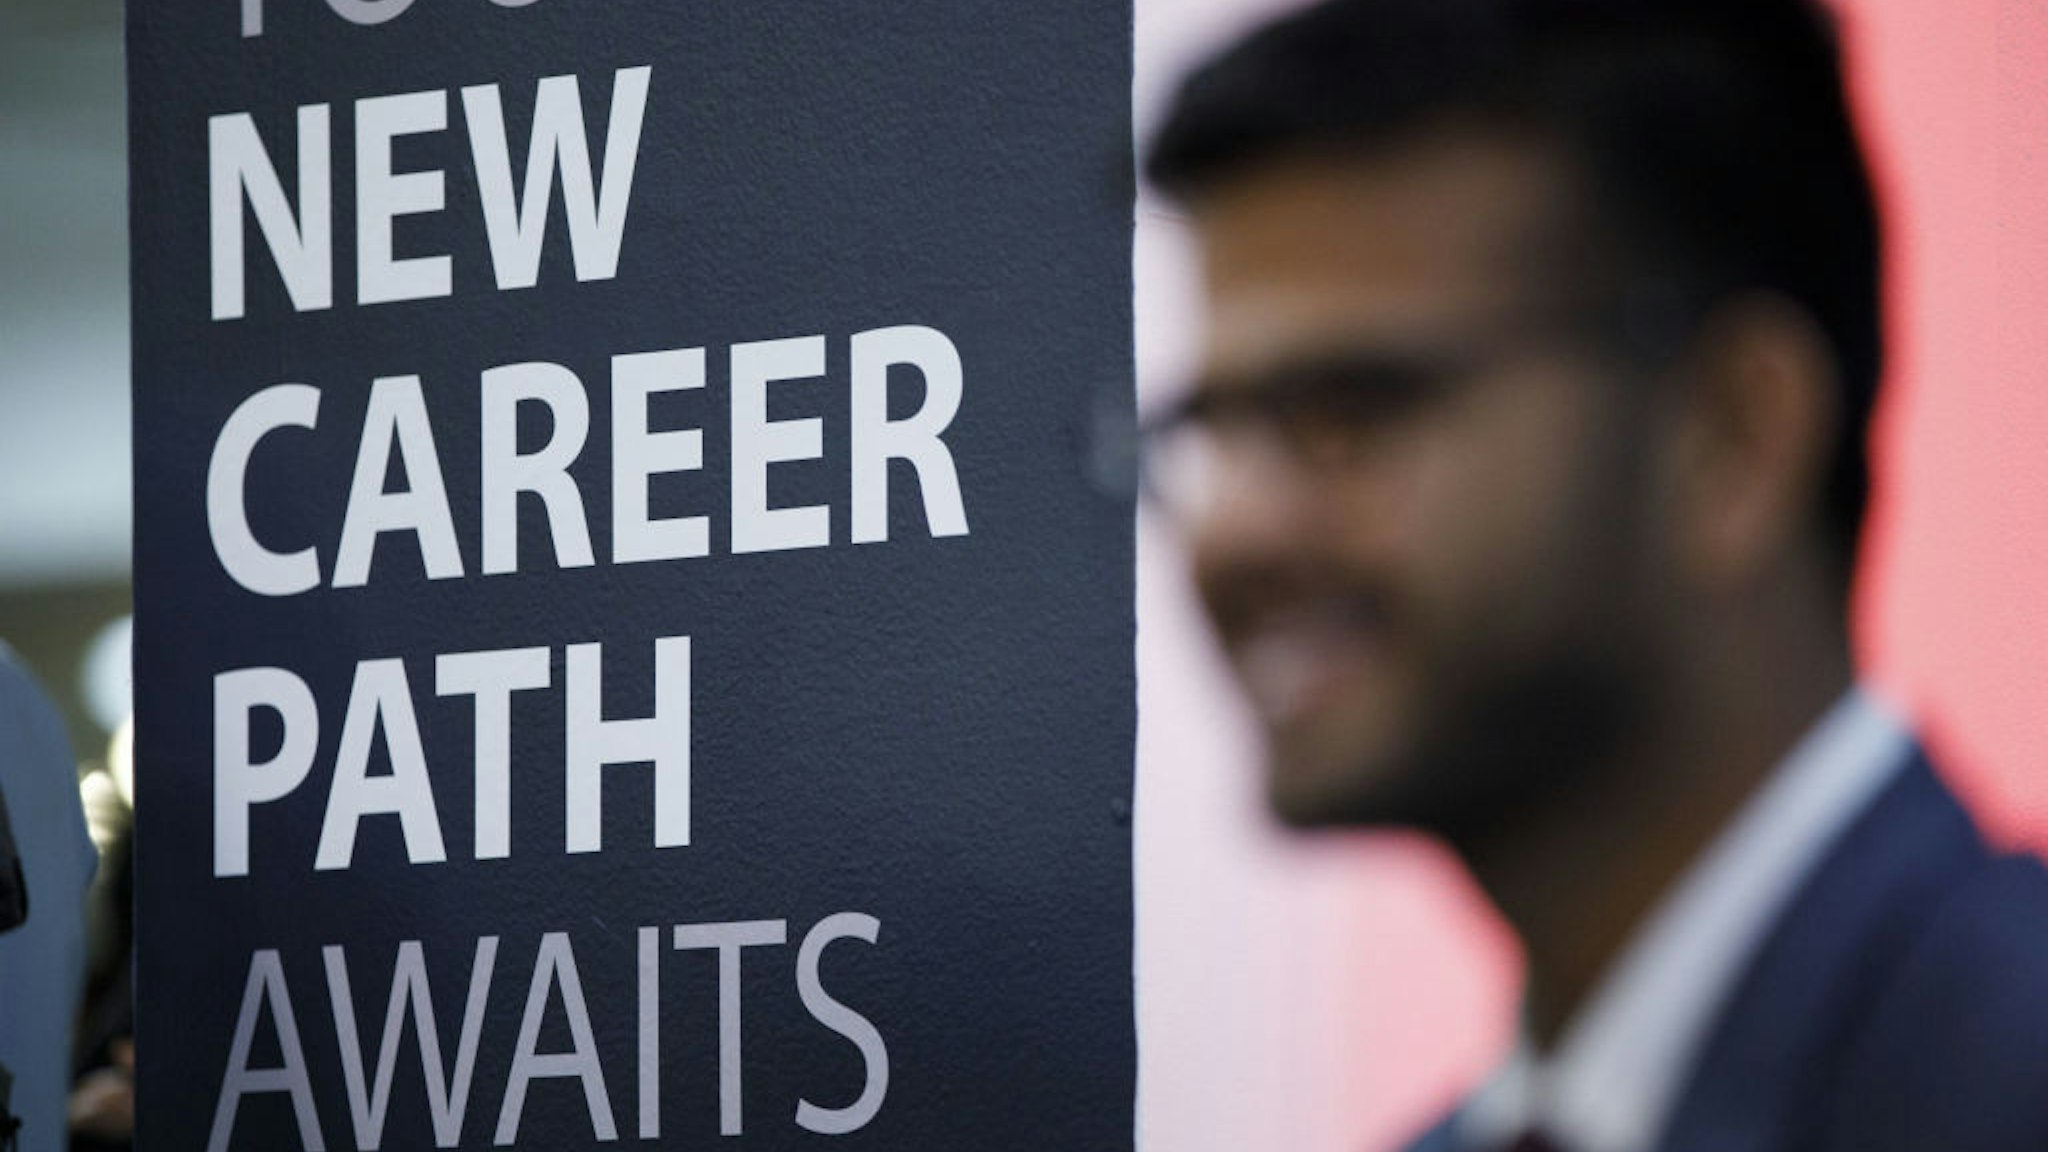 A sign reading "New Career Paths" is displayed during the TechFair LA career fair in Los Angeles, California, U.S., on Thursday, March 8, 2018. The U.S. Department of Labor is scheduled to release initial jobless claims on March 15. Photographer: Patrick T. Fallon/Bloomberg via Getty Images